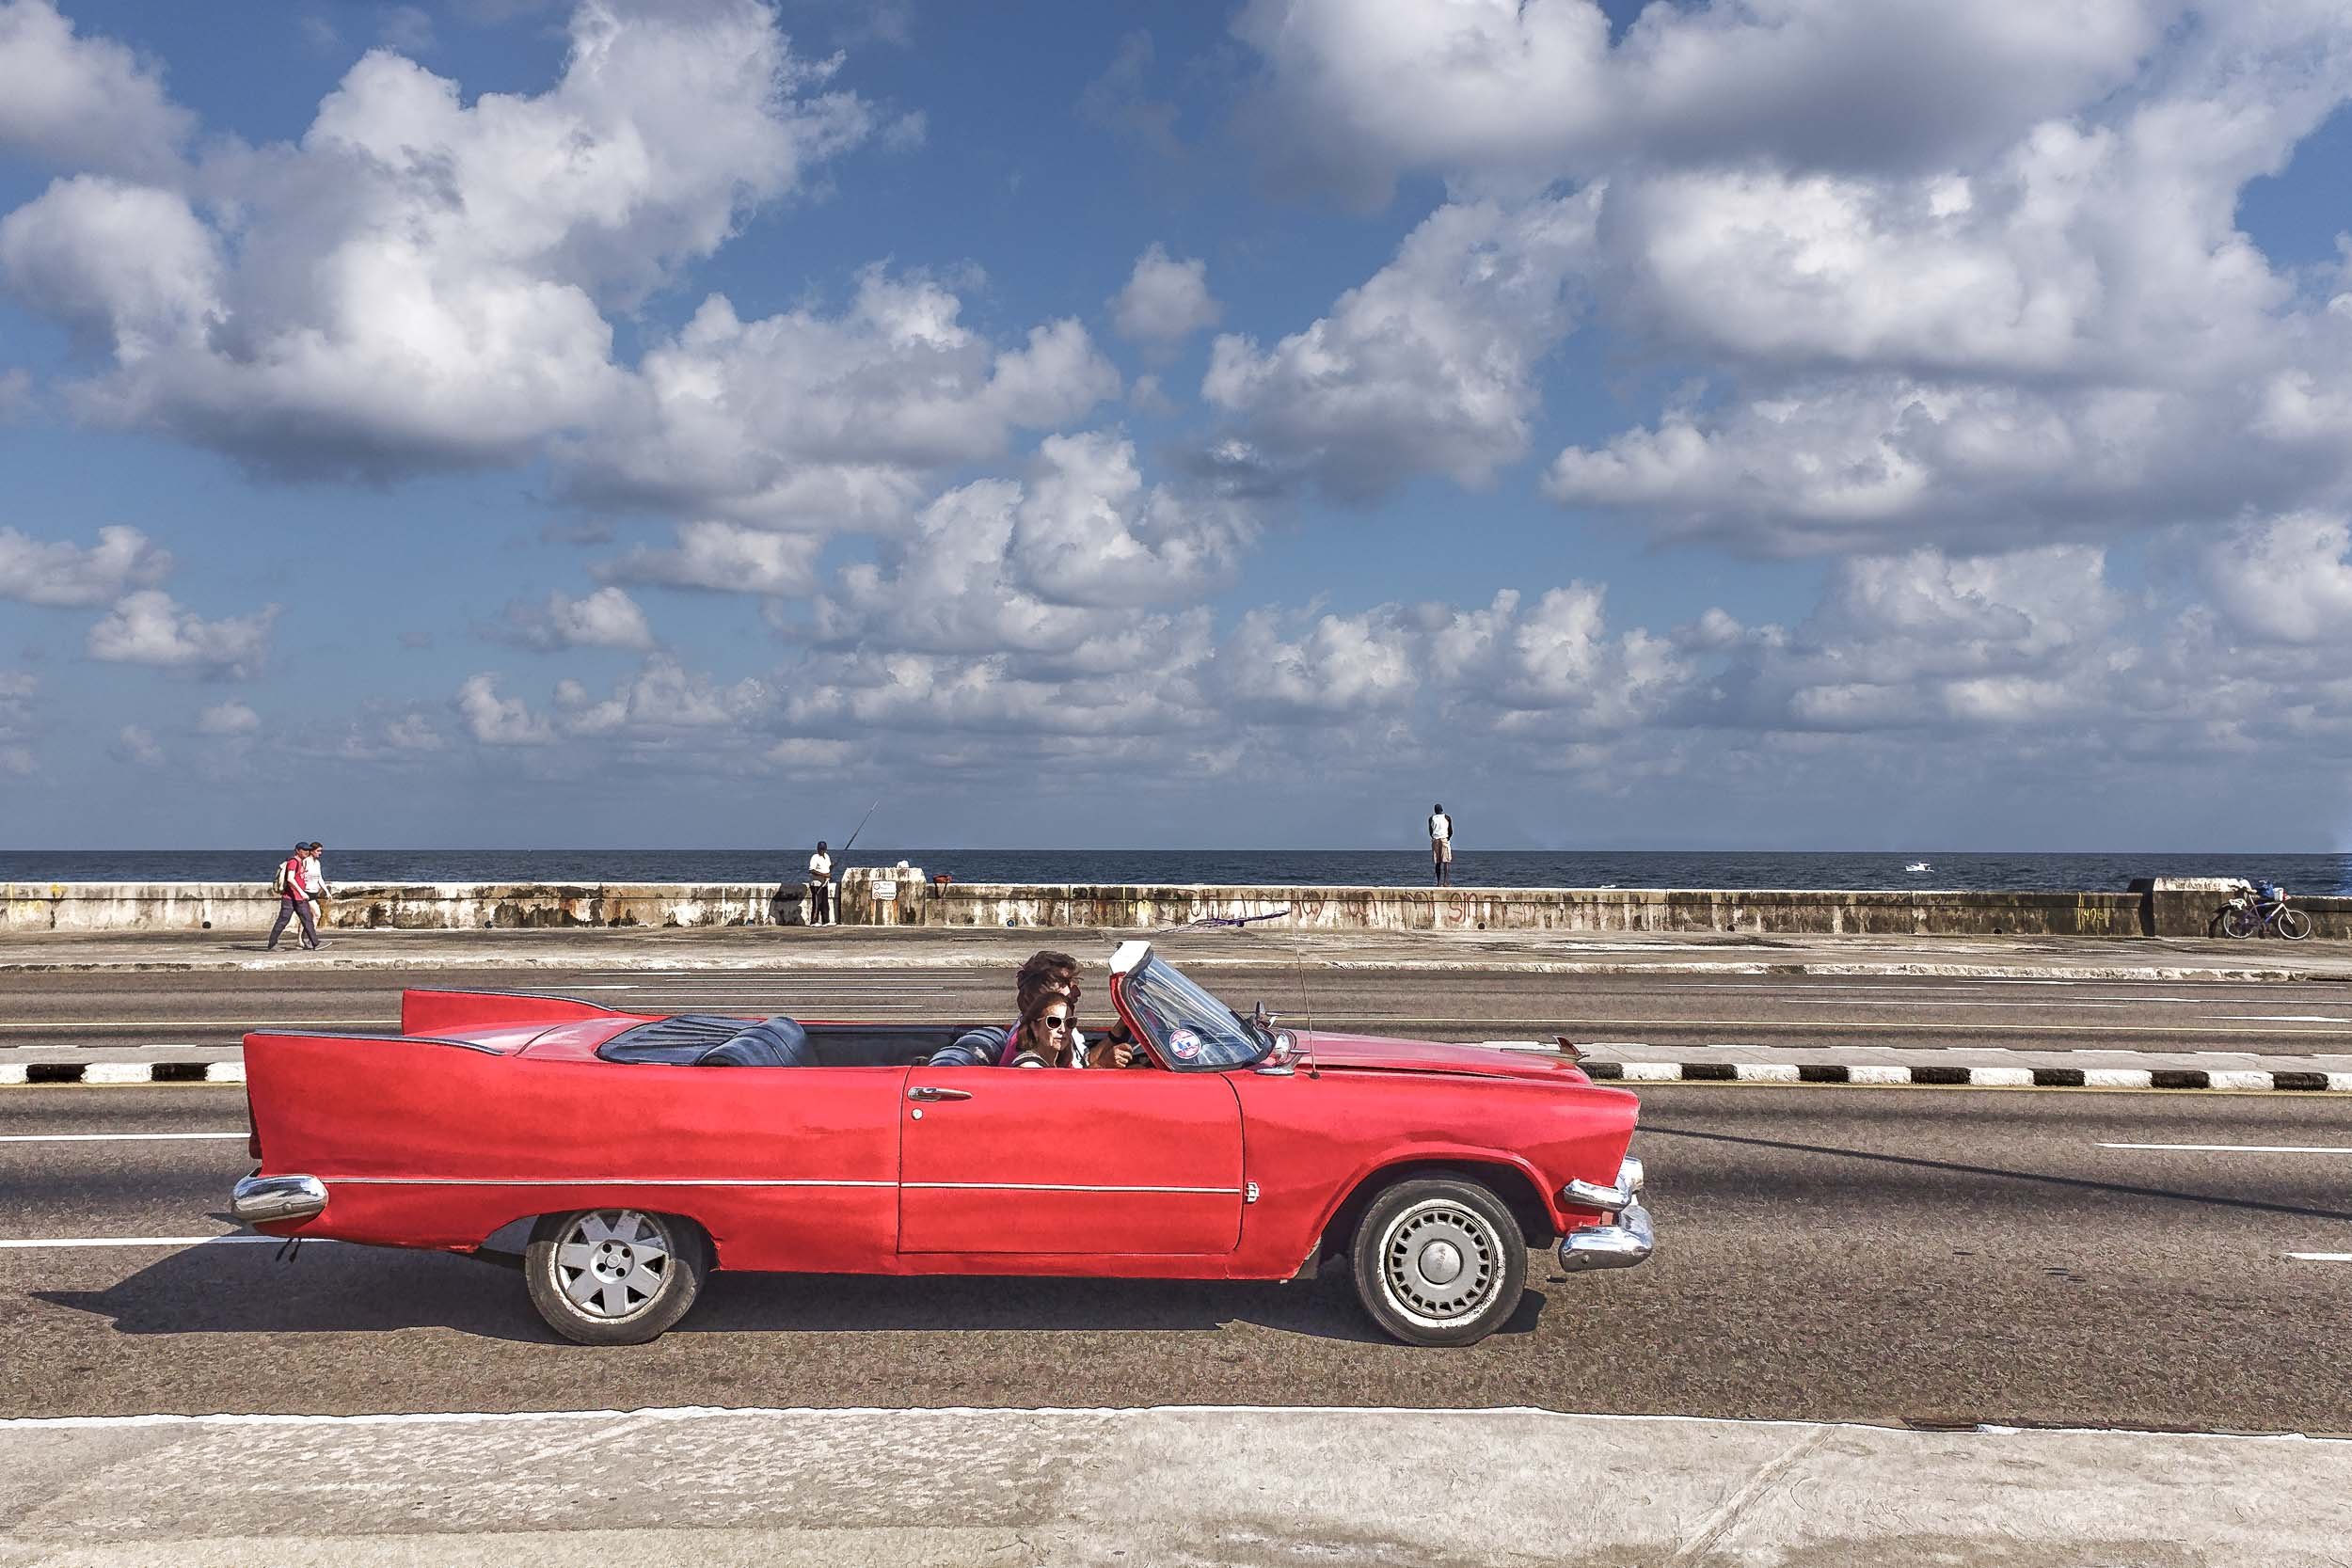 Sunday Drive on the Malecon